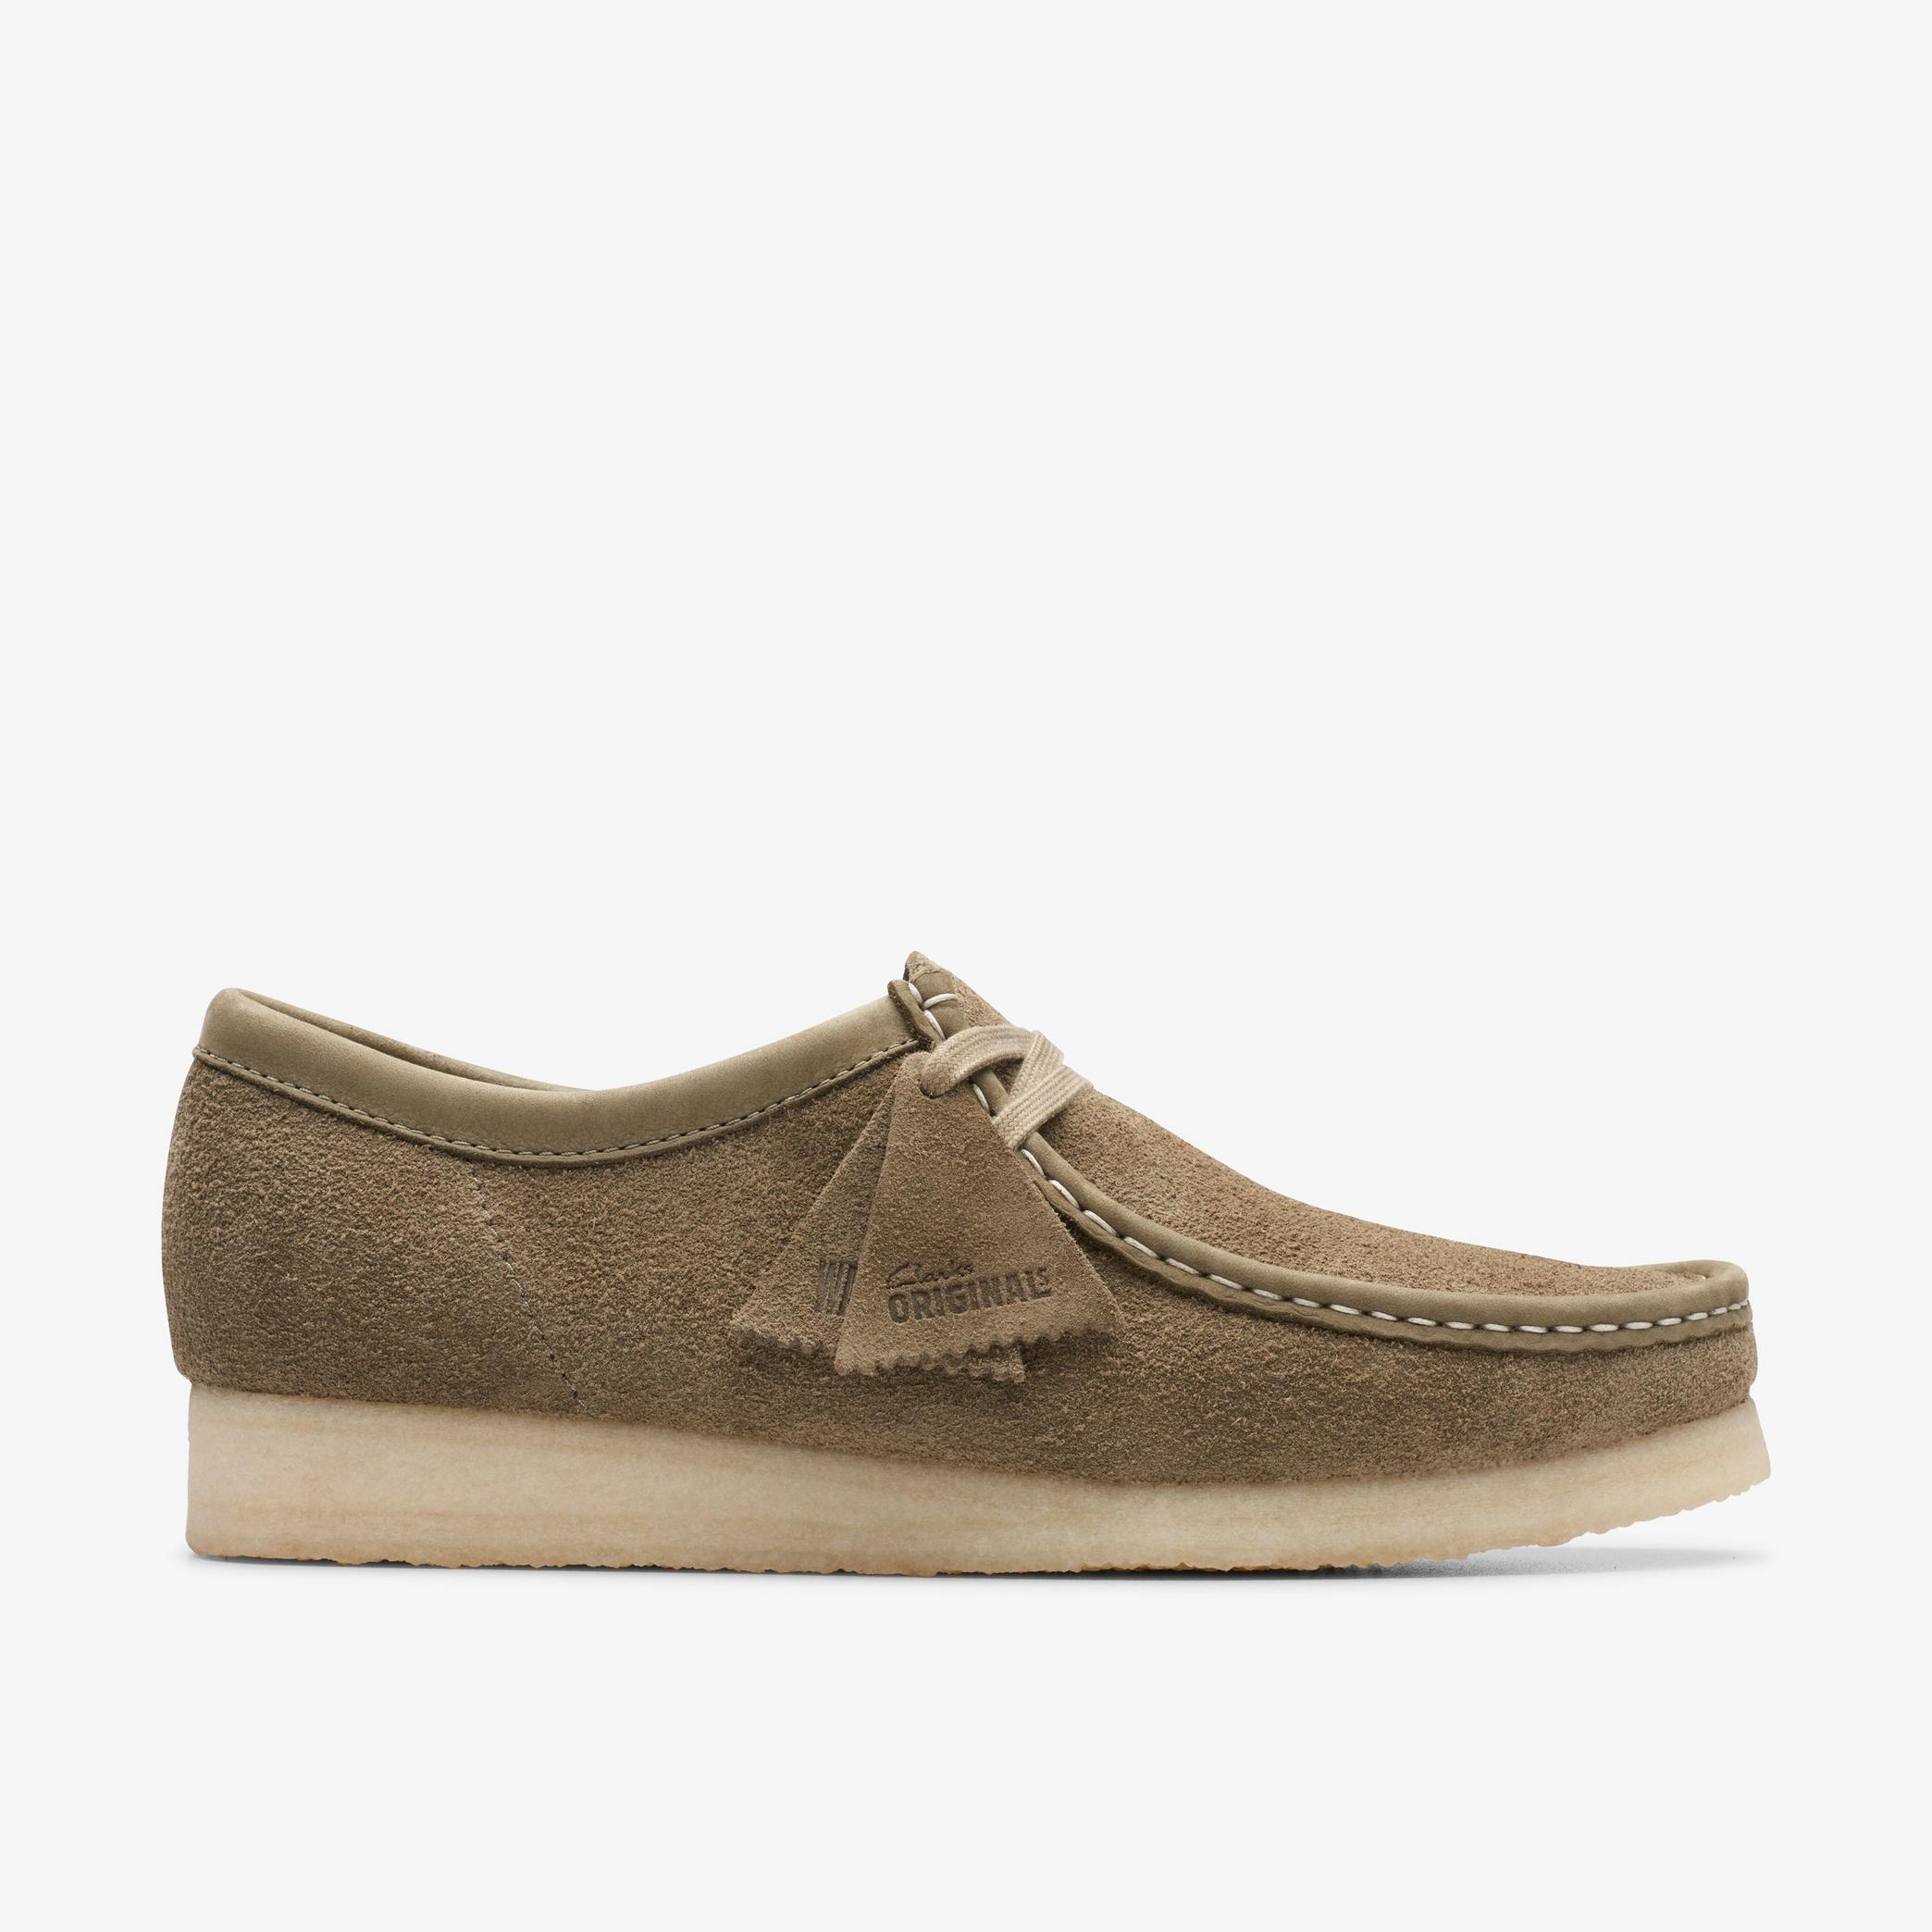 Wallabee Pale Khaki Suede Wallabee, view 1 of 7